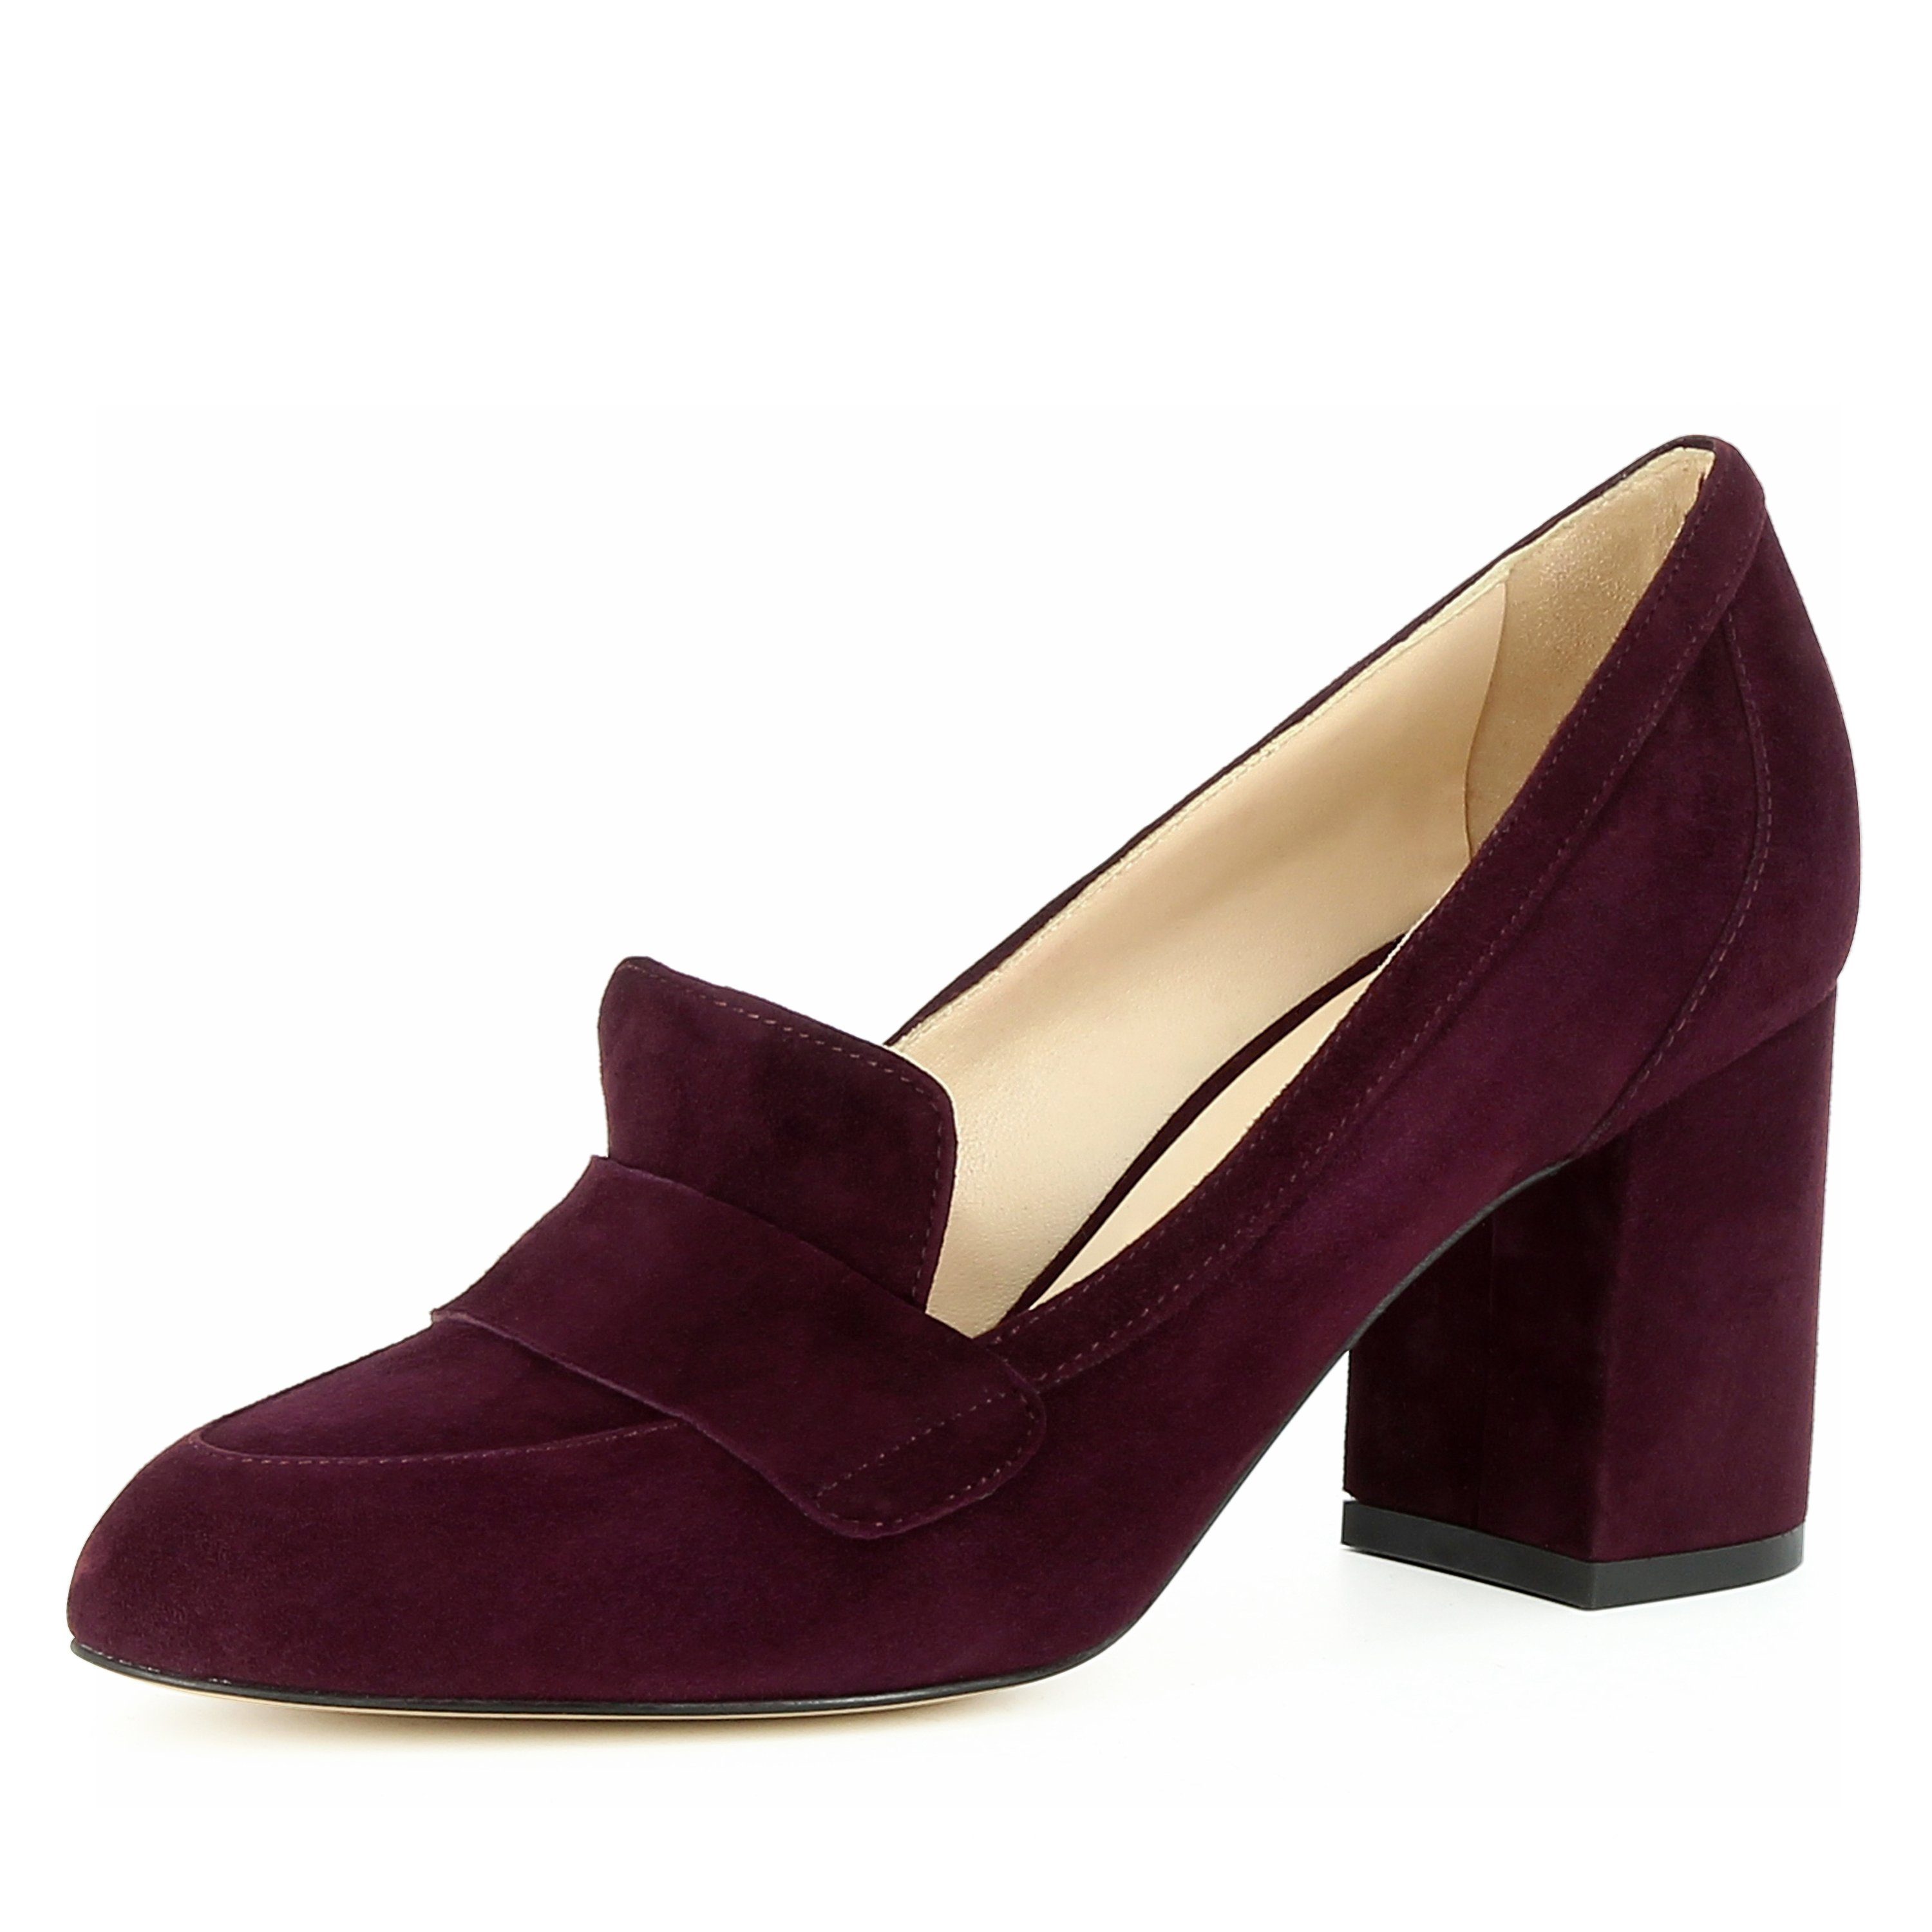 NELLY bordeaux Evita Pumps in Italy Handmade